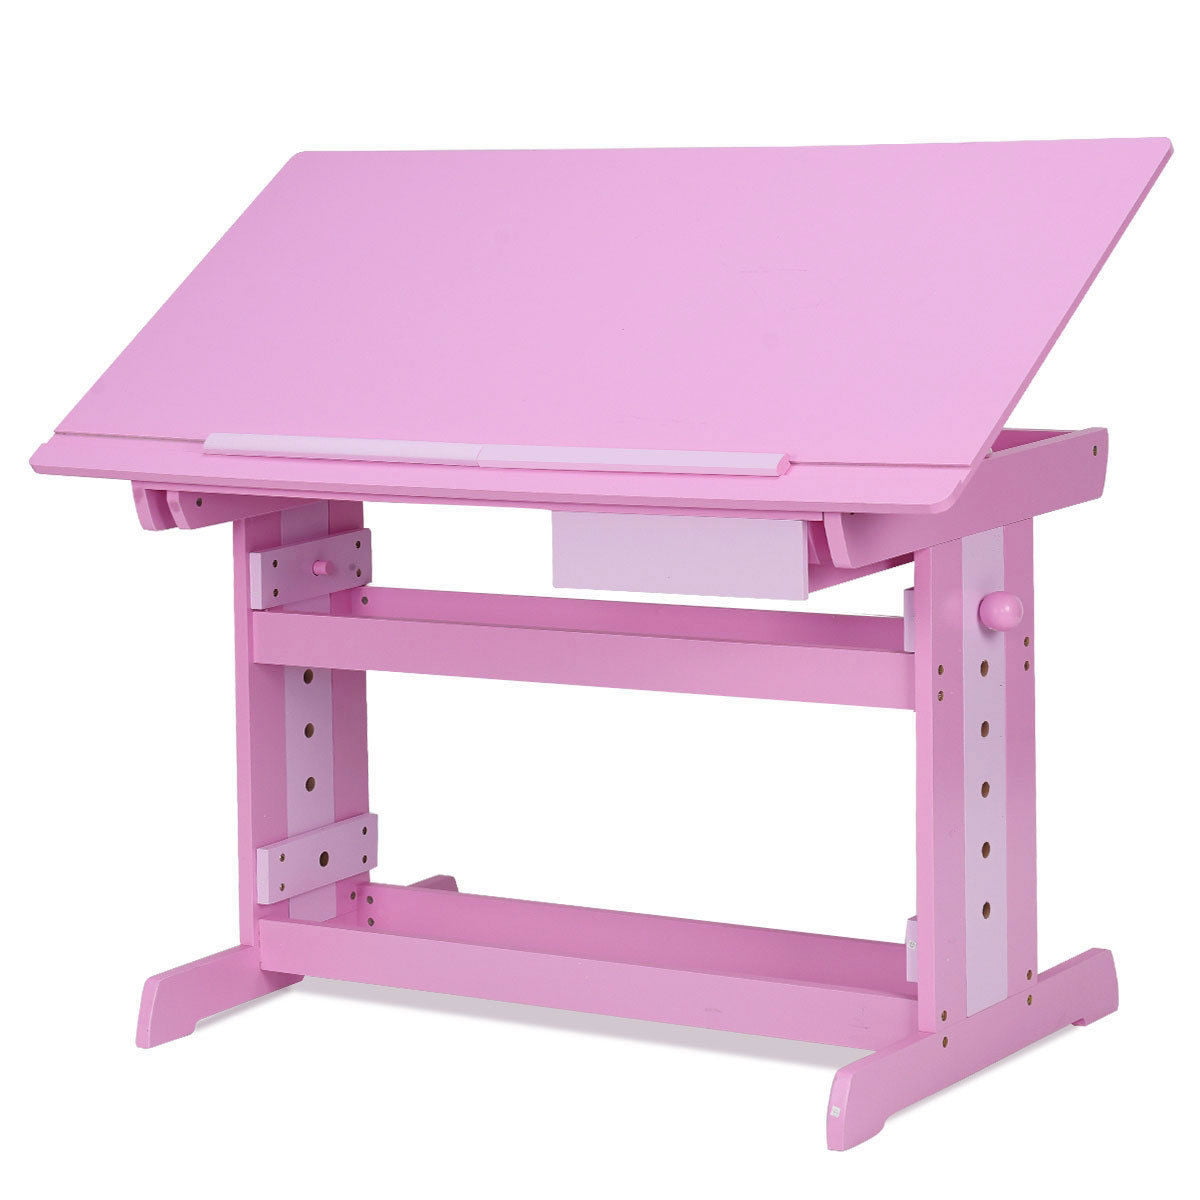 Wooden Adjustable Art Drafting Table with Drawer - Walmart.com